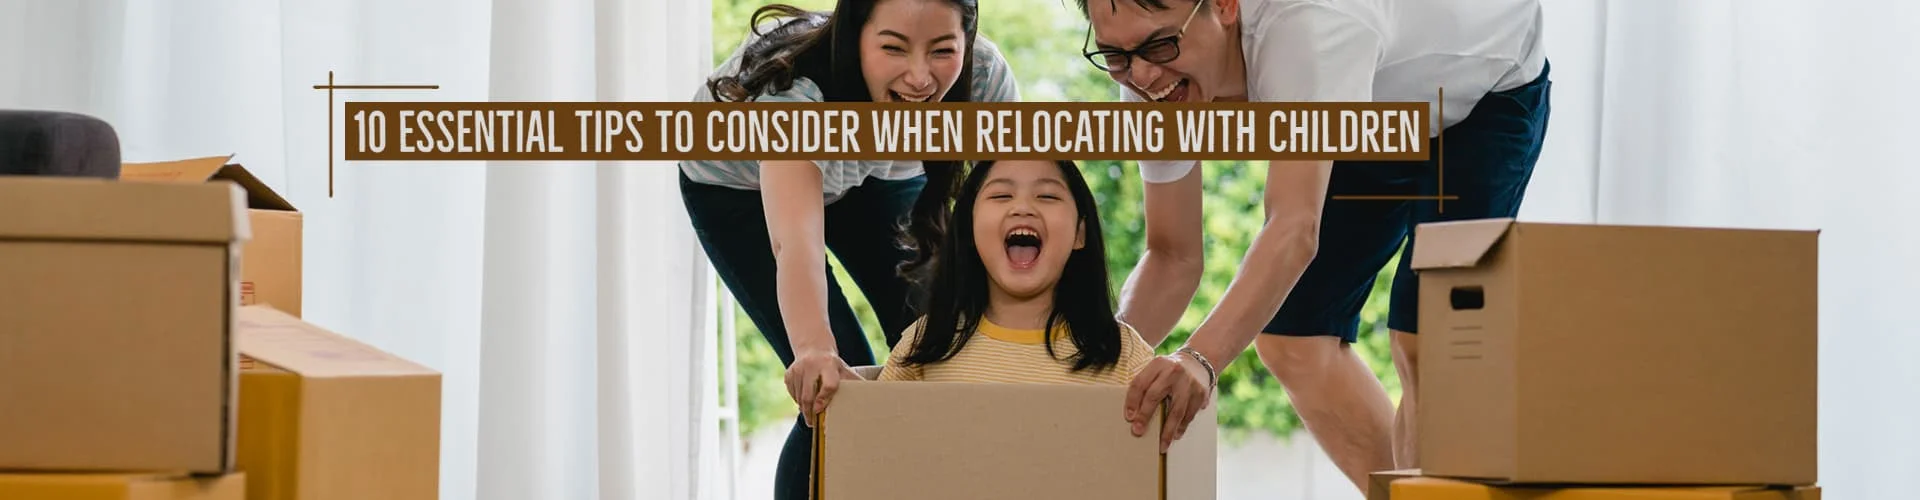 10 Essential Tips To Consider When Relocating With Children